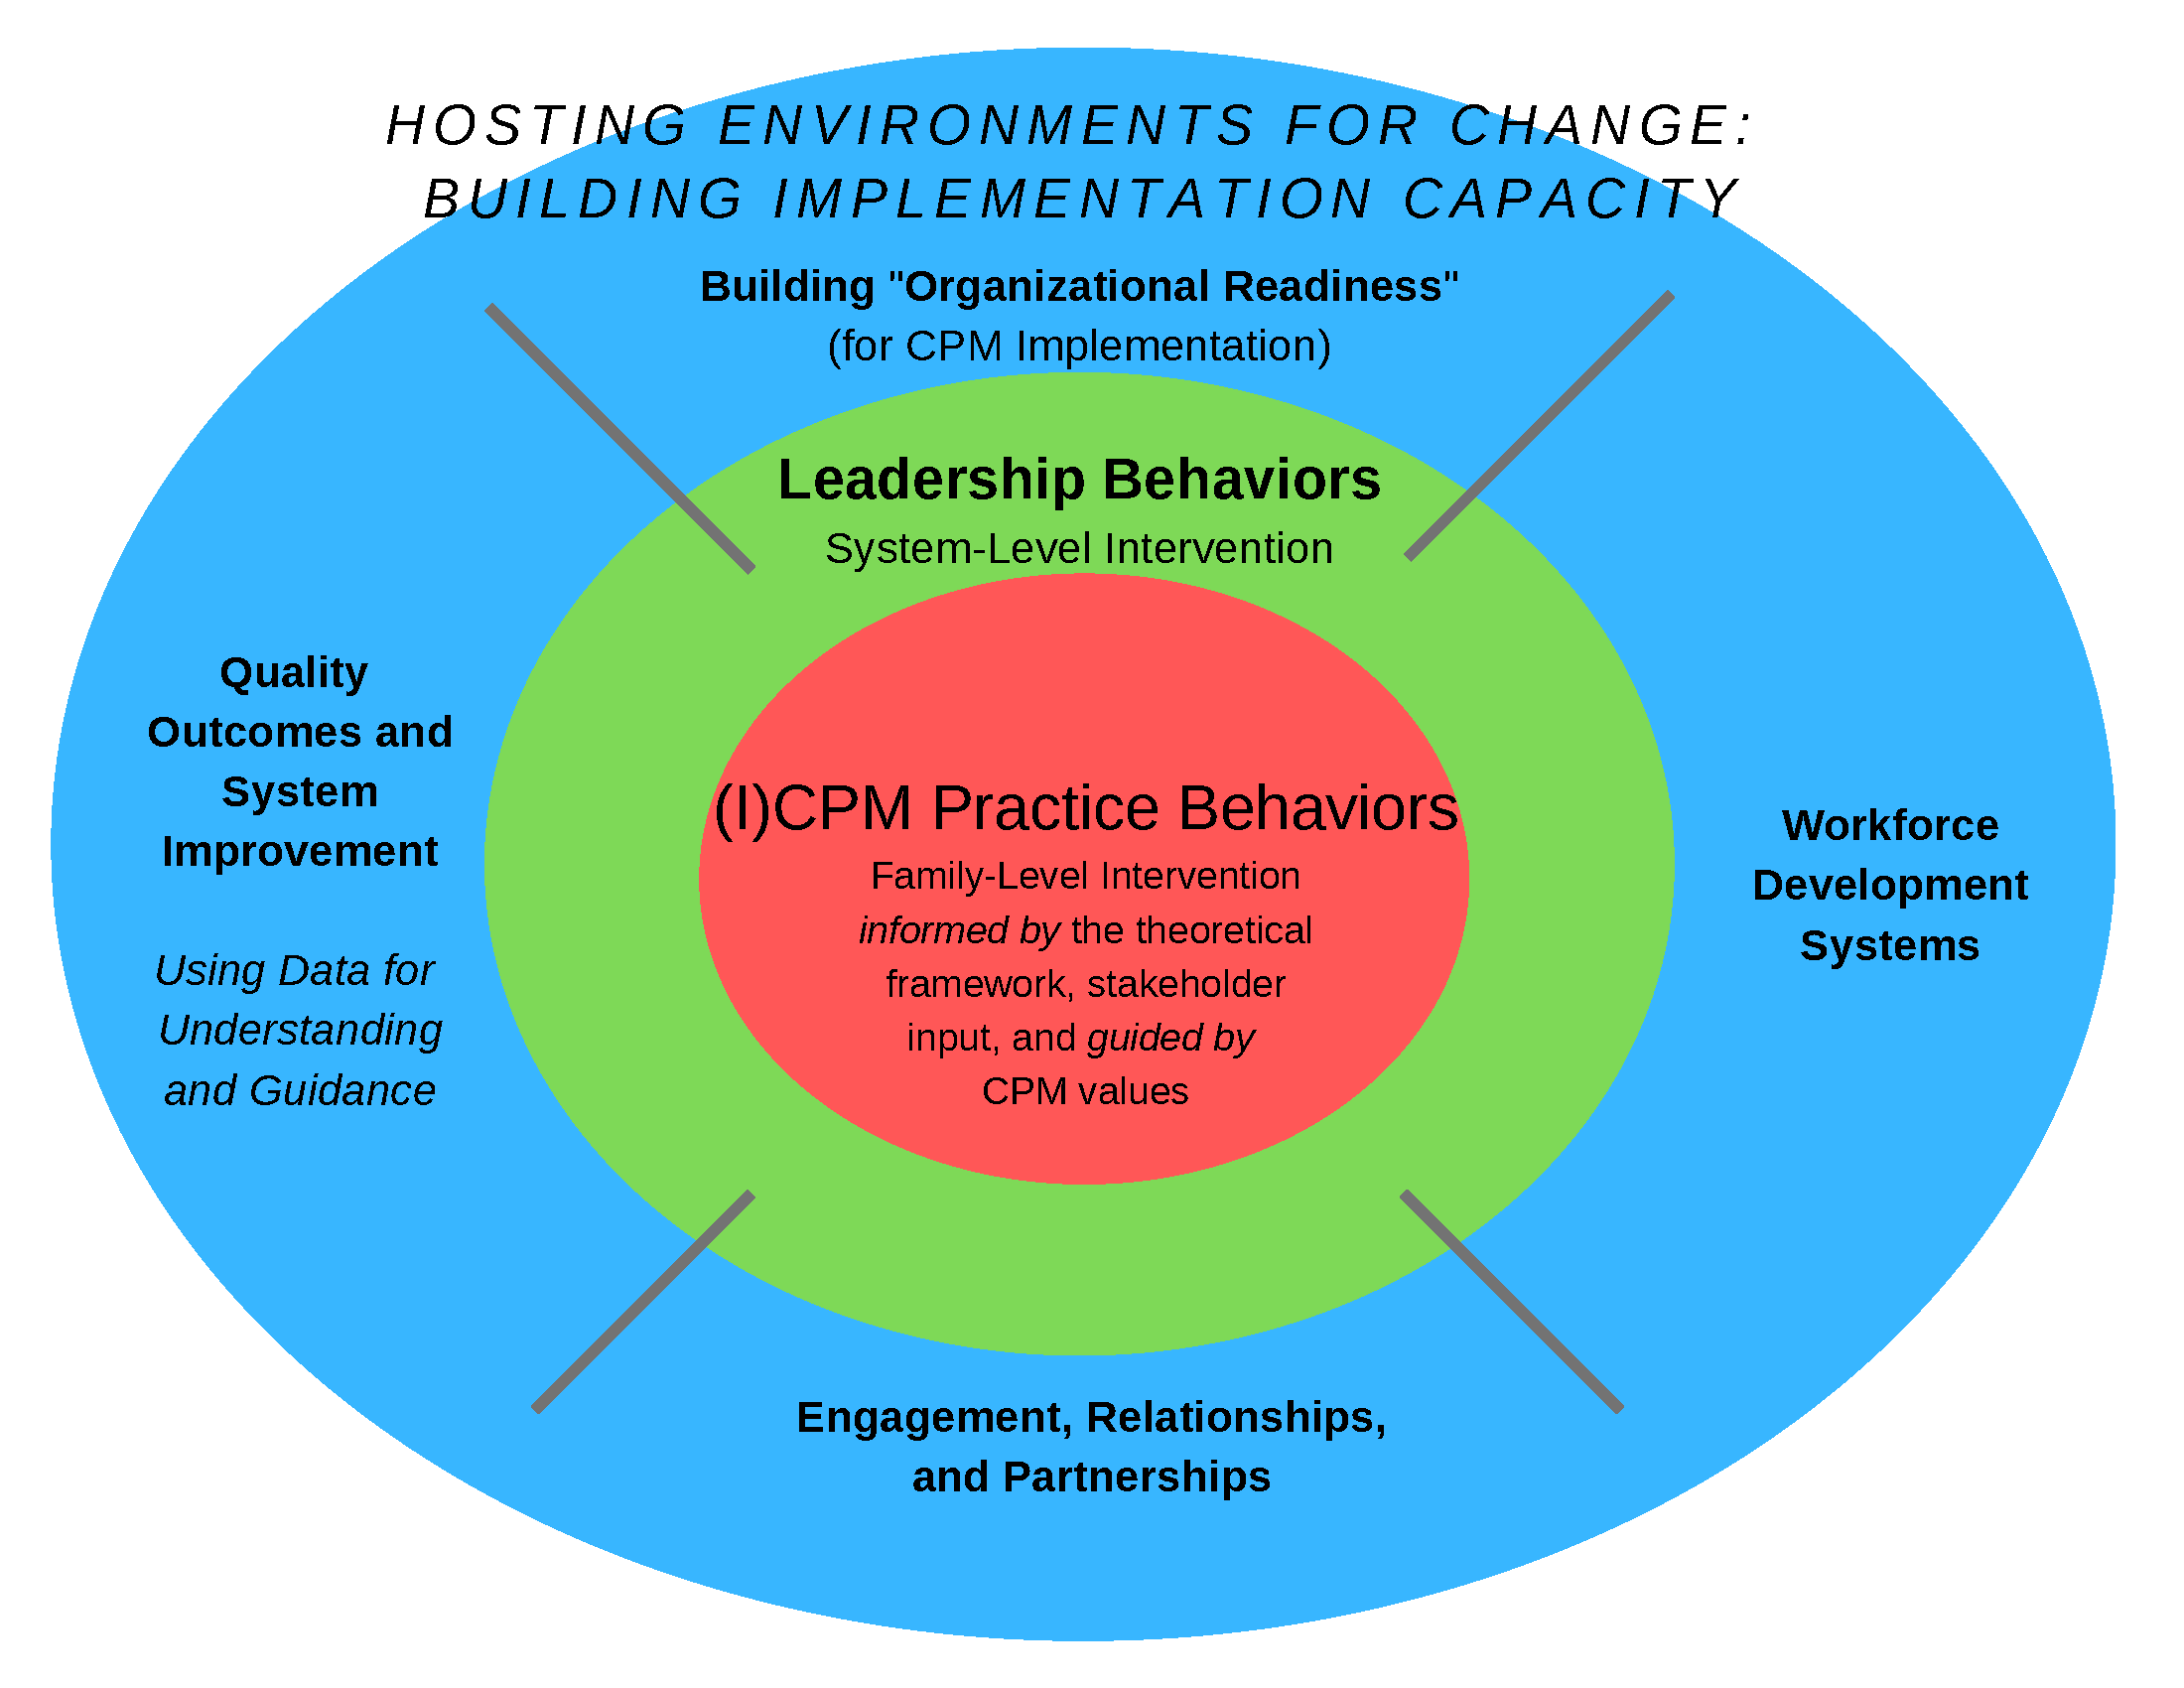 Building Implementation Capacity